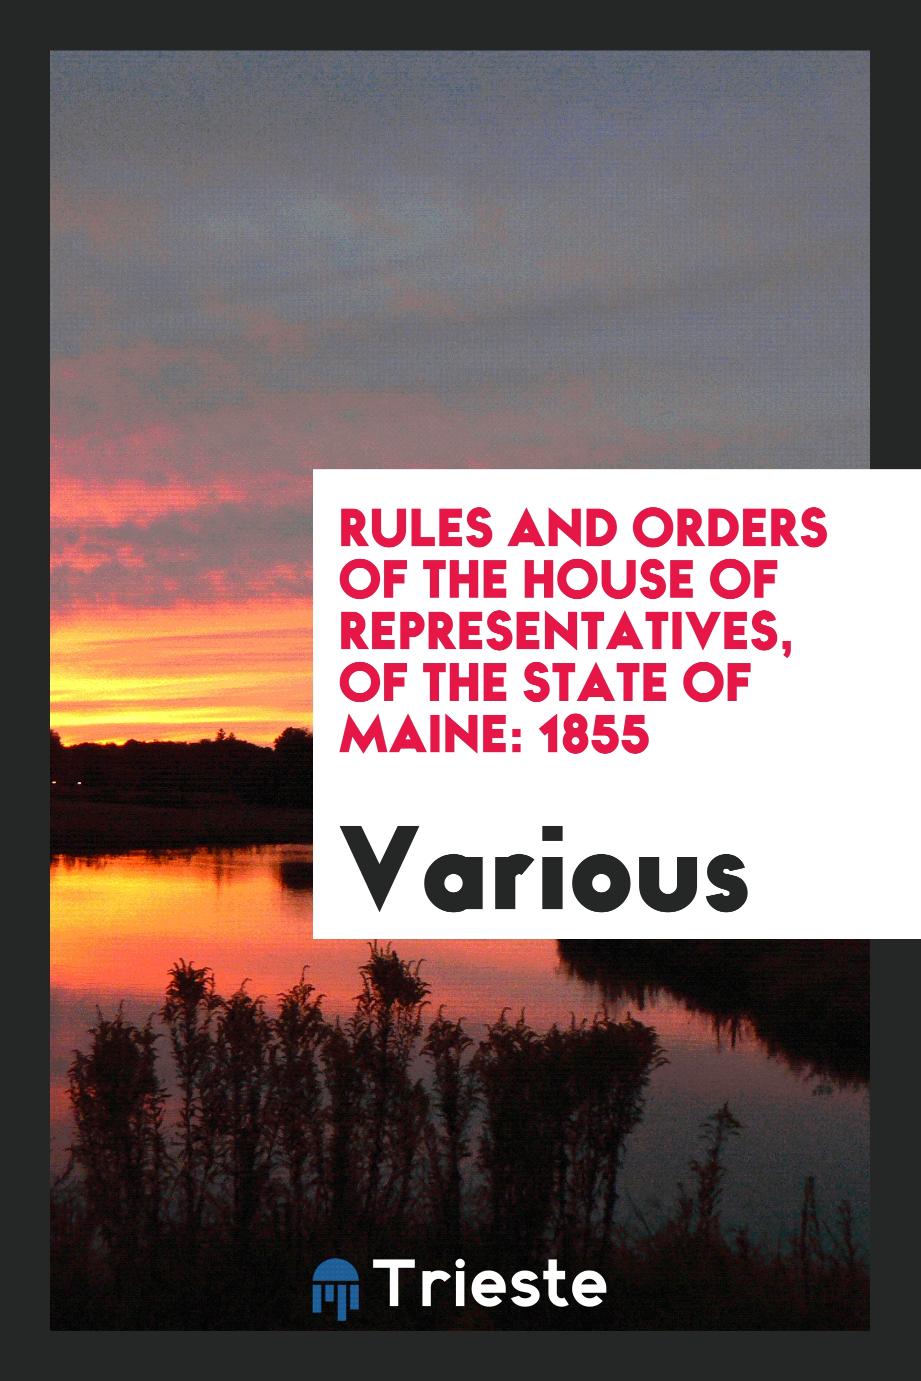 Rules and Orders of the House of Representatives, of the State of Maine: 1855